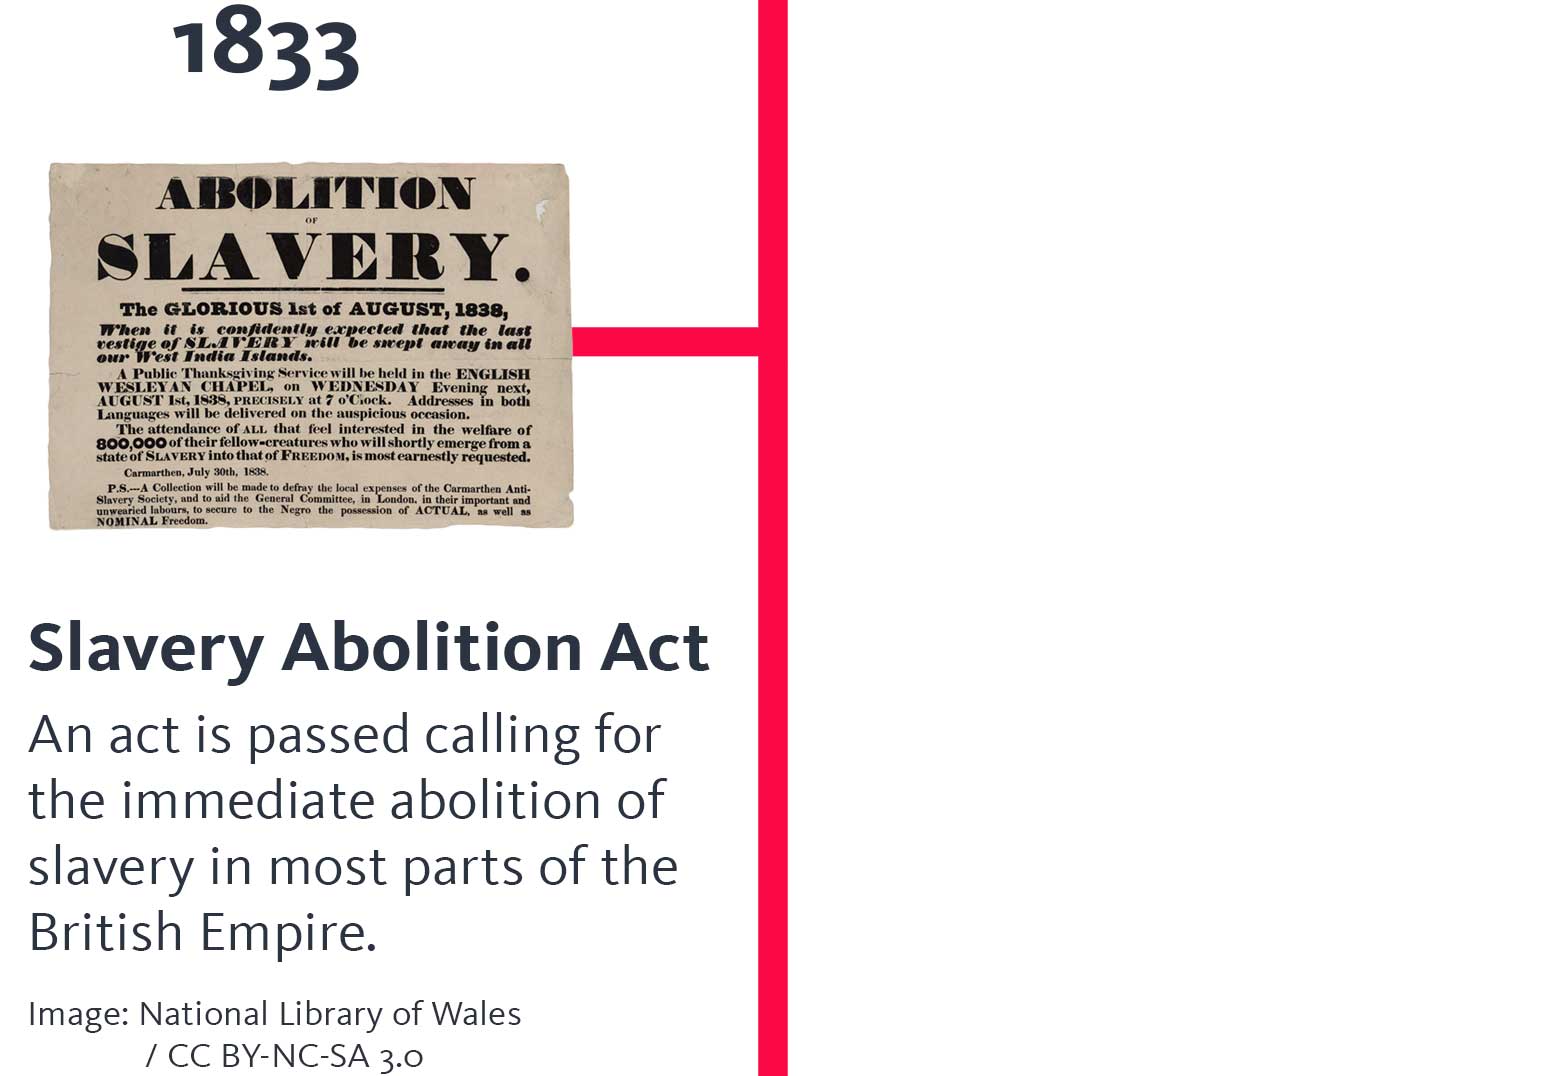 The year '1833' appears above an image of a newspaper headline: 'Abolition of Slavery'. A heading below says 'Slavery Abolition Act', and text below that says 'An act is passed calling for the immediate abolition of slavery in most parts of the British Empire.' and below that, 'Image: National Library of Wales / CC BY-NC-SA 3.0'.